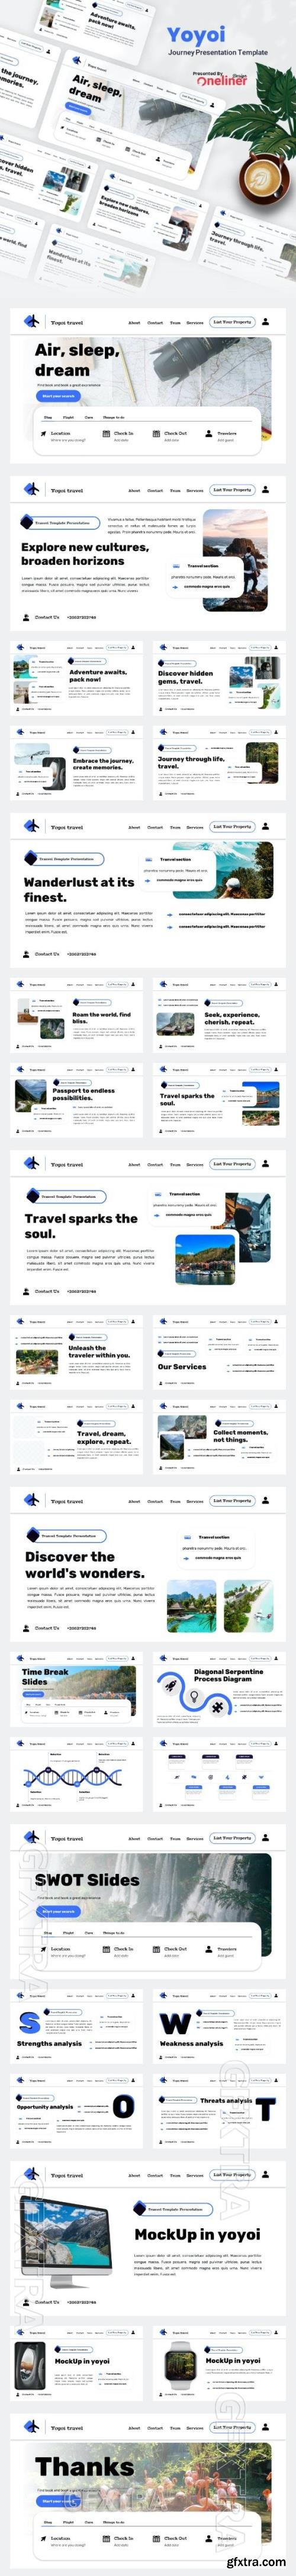 Yoyoi - Travel Agency Powerpoint Template 49645715